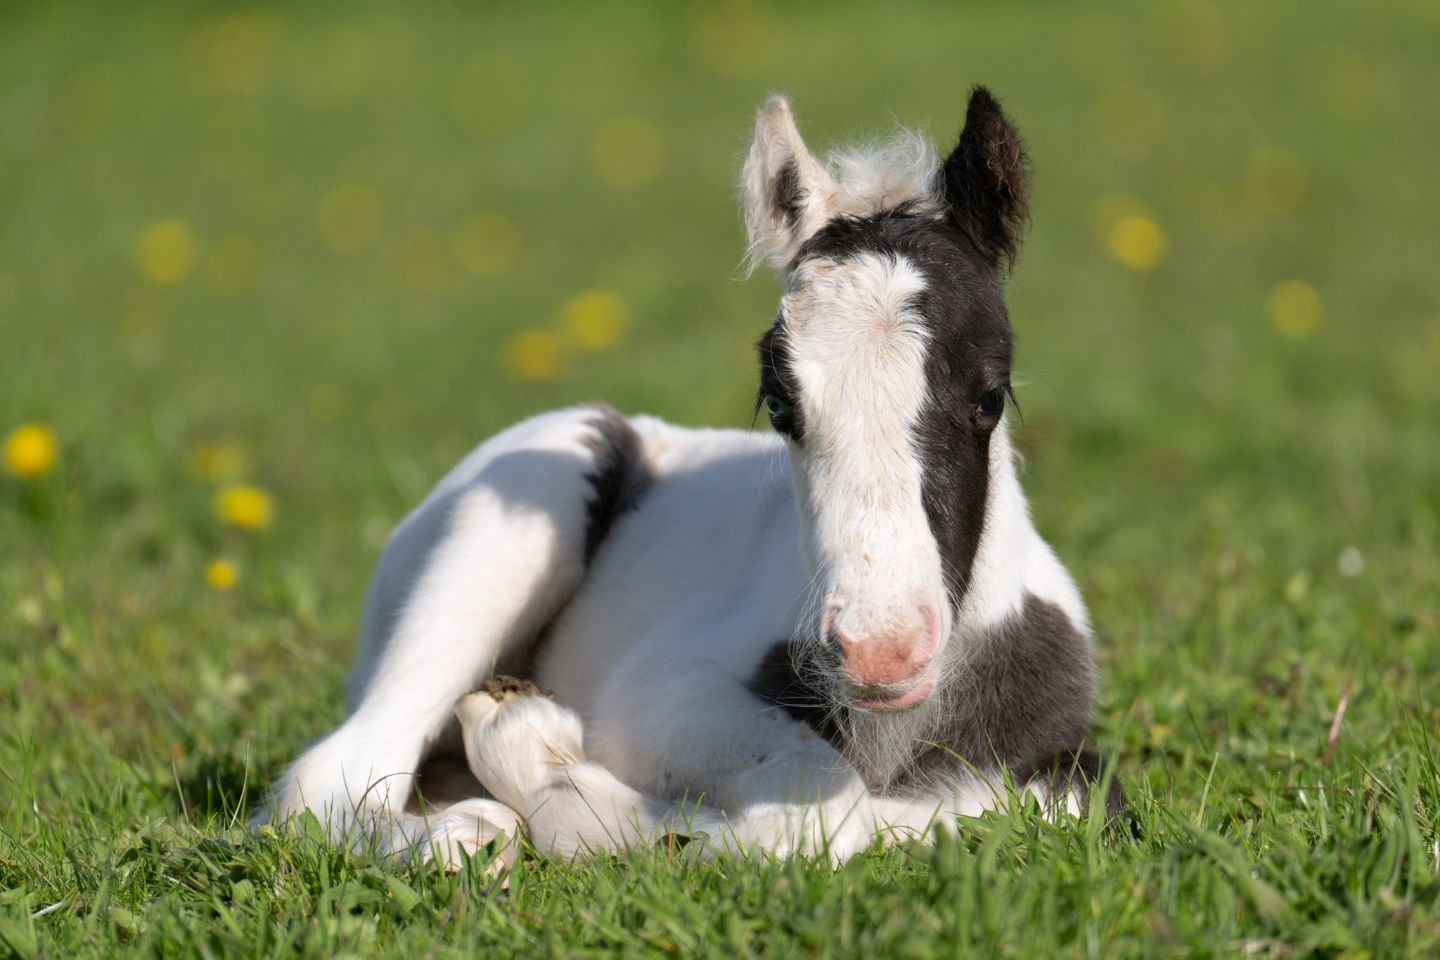 Nearly foaling asleep in the sunshine!

Saw this gorgeous young filly on today's sunny walk in South Yorkshire and just had to get a photo 😍

#foal #horse #foalsofinstagram #cuteanimals #springvibes #animallovers #marvelous_animals #your_fourleggedf